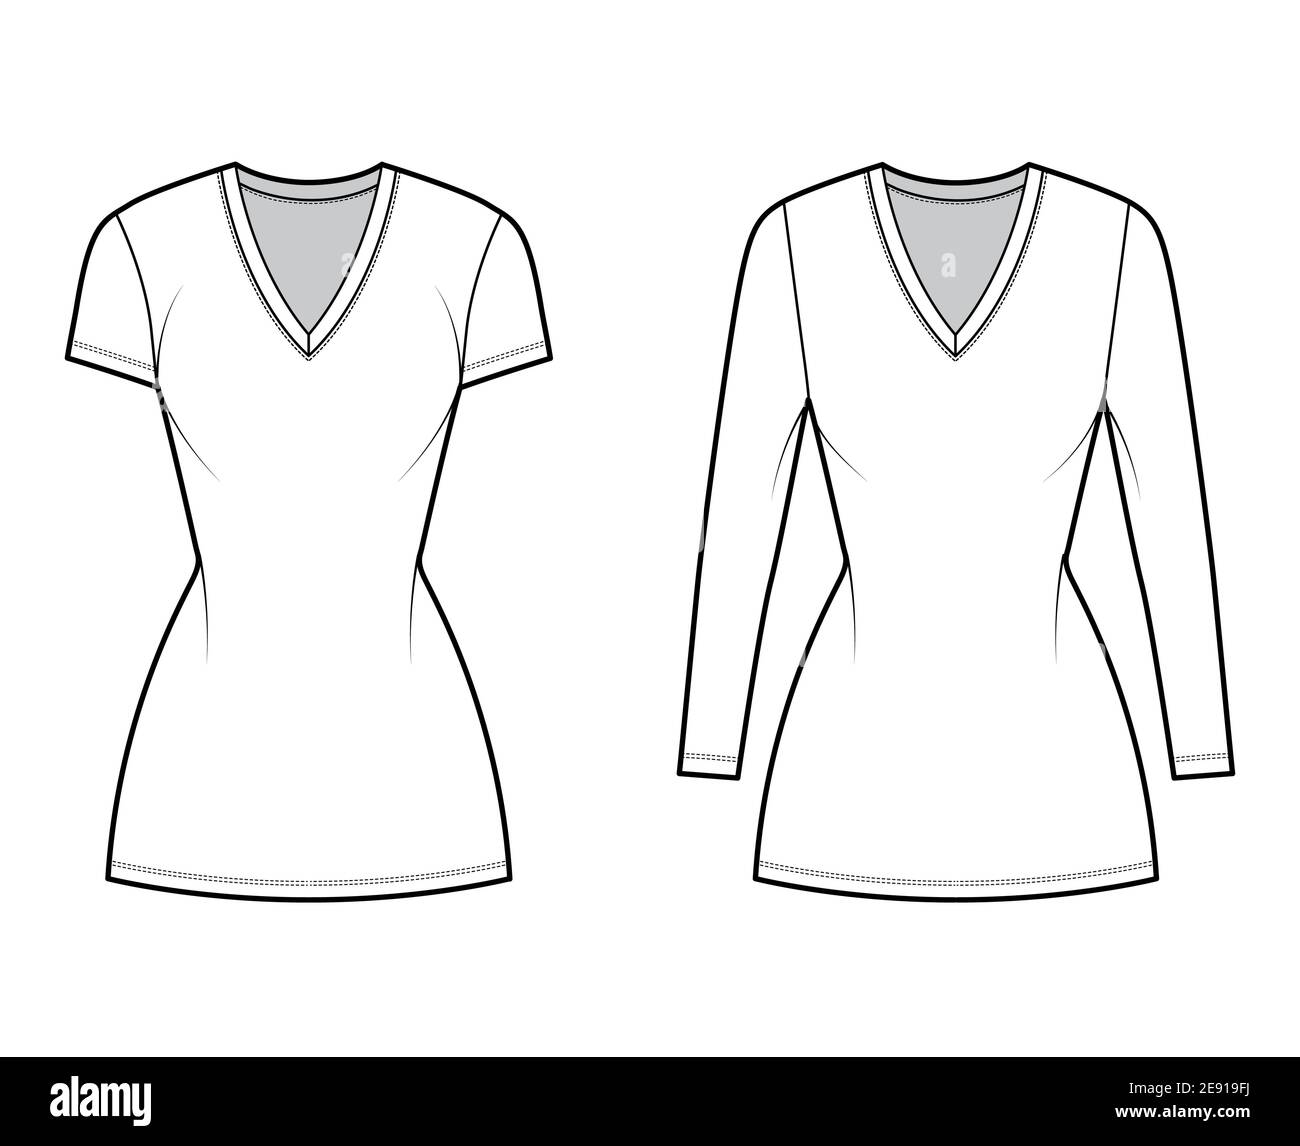 T-shirt dress technical fashion illustration with V-neck, long, short sleeves, mini length, fitted body, Pencil fullness. Flat apparel template front, white color. Women, men, unisex CAD mockup Stock Vector